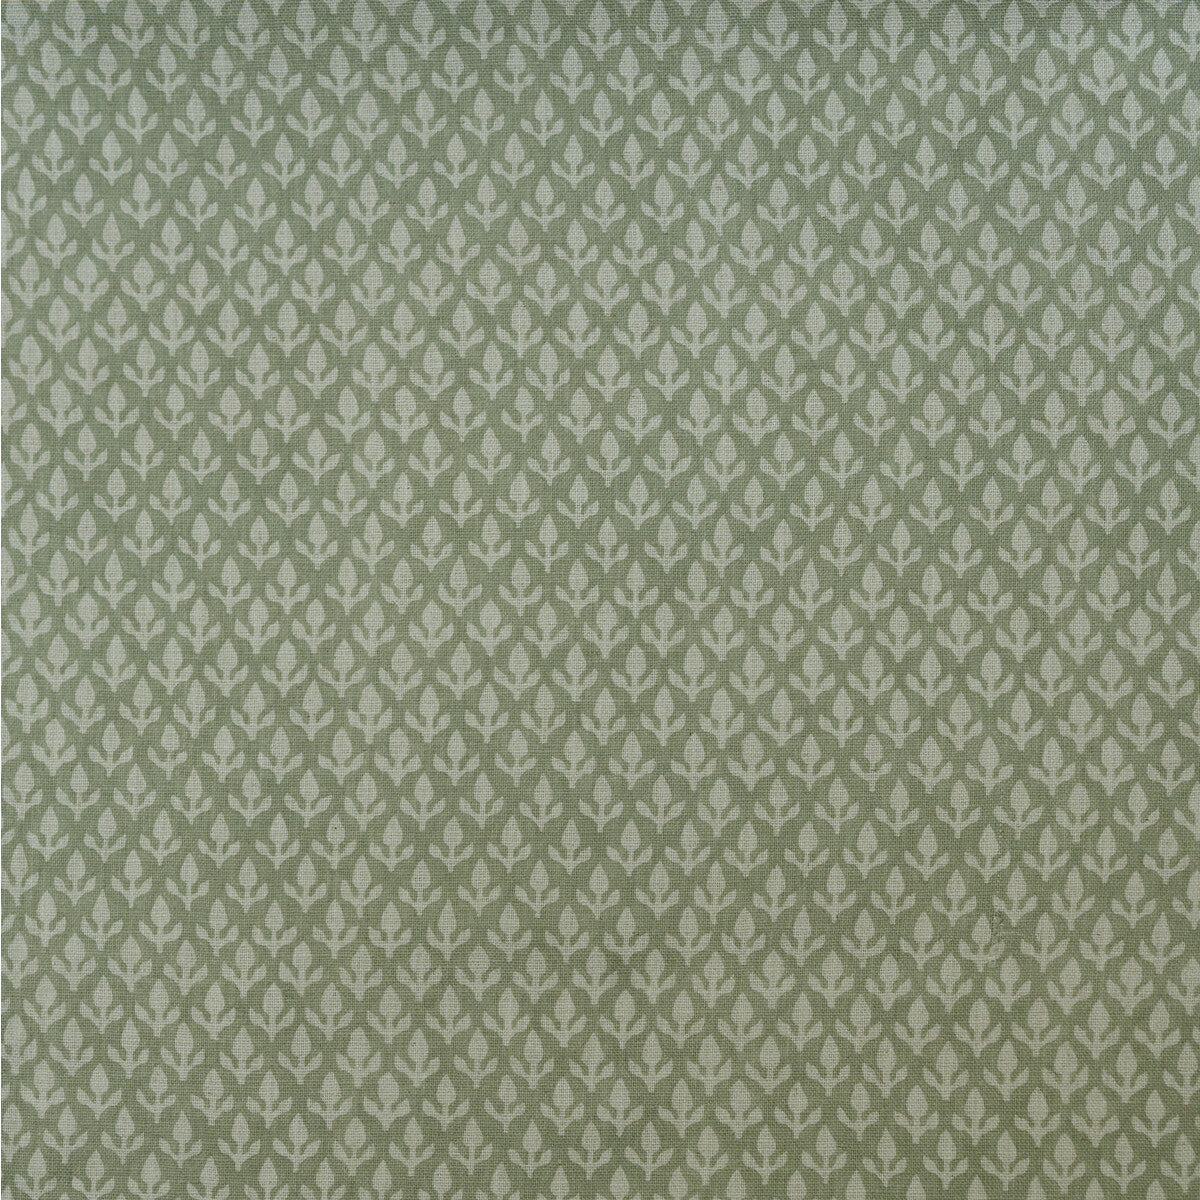 Bud fabric in fennel color - pattern AM100379.123.0 - by Kravet Couture in the Andrew Martin Garden Path collection